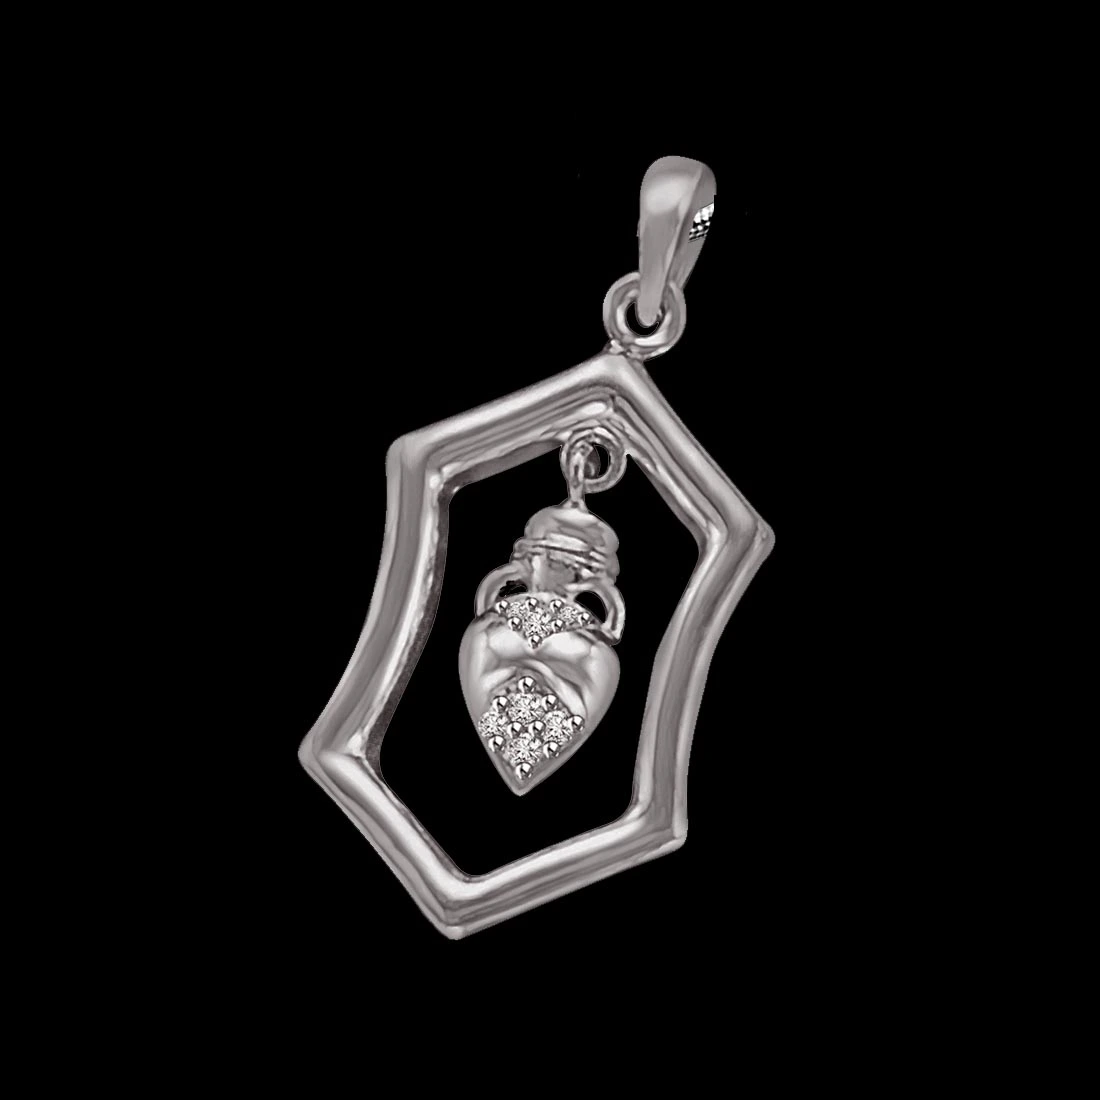 Sparkling Drop - Sterling Silver Real Diamond Pendant with 18 IN Chain (SDP208)